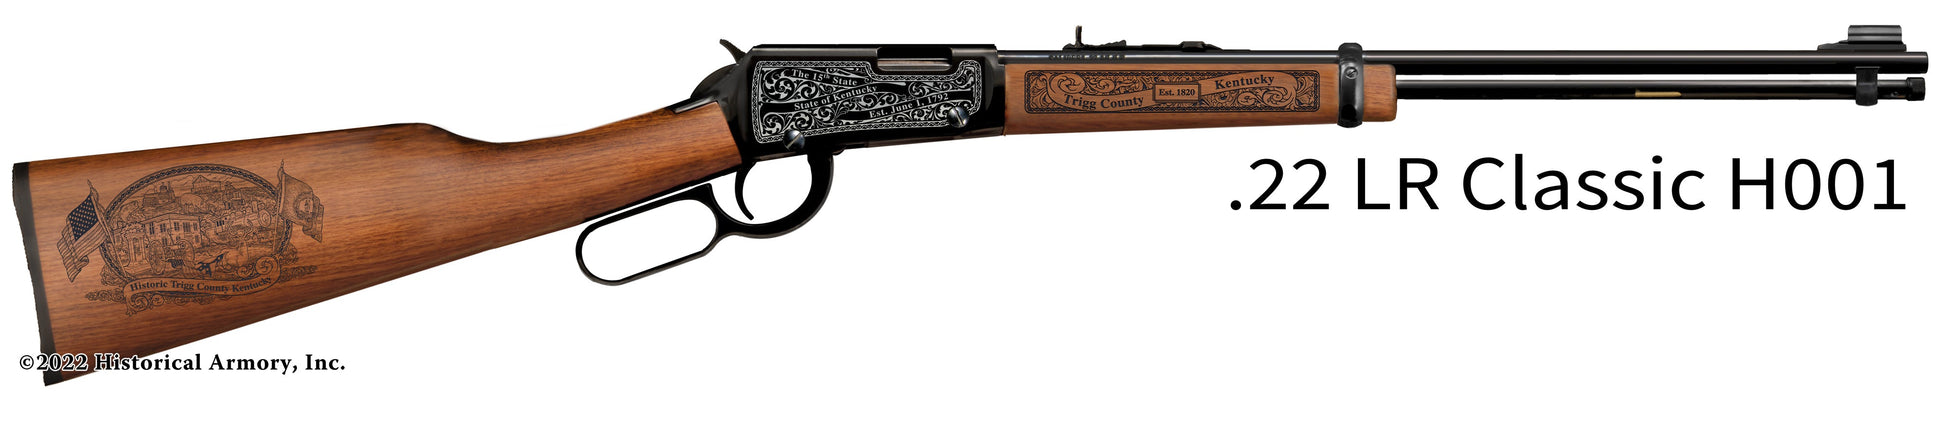 Trigg County Kentucky Engraved Rifle – Historical Armory